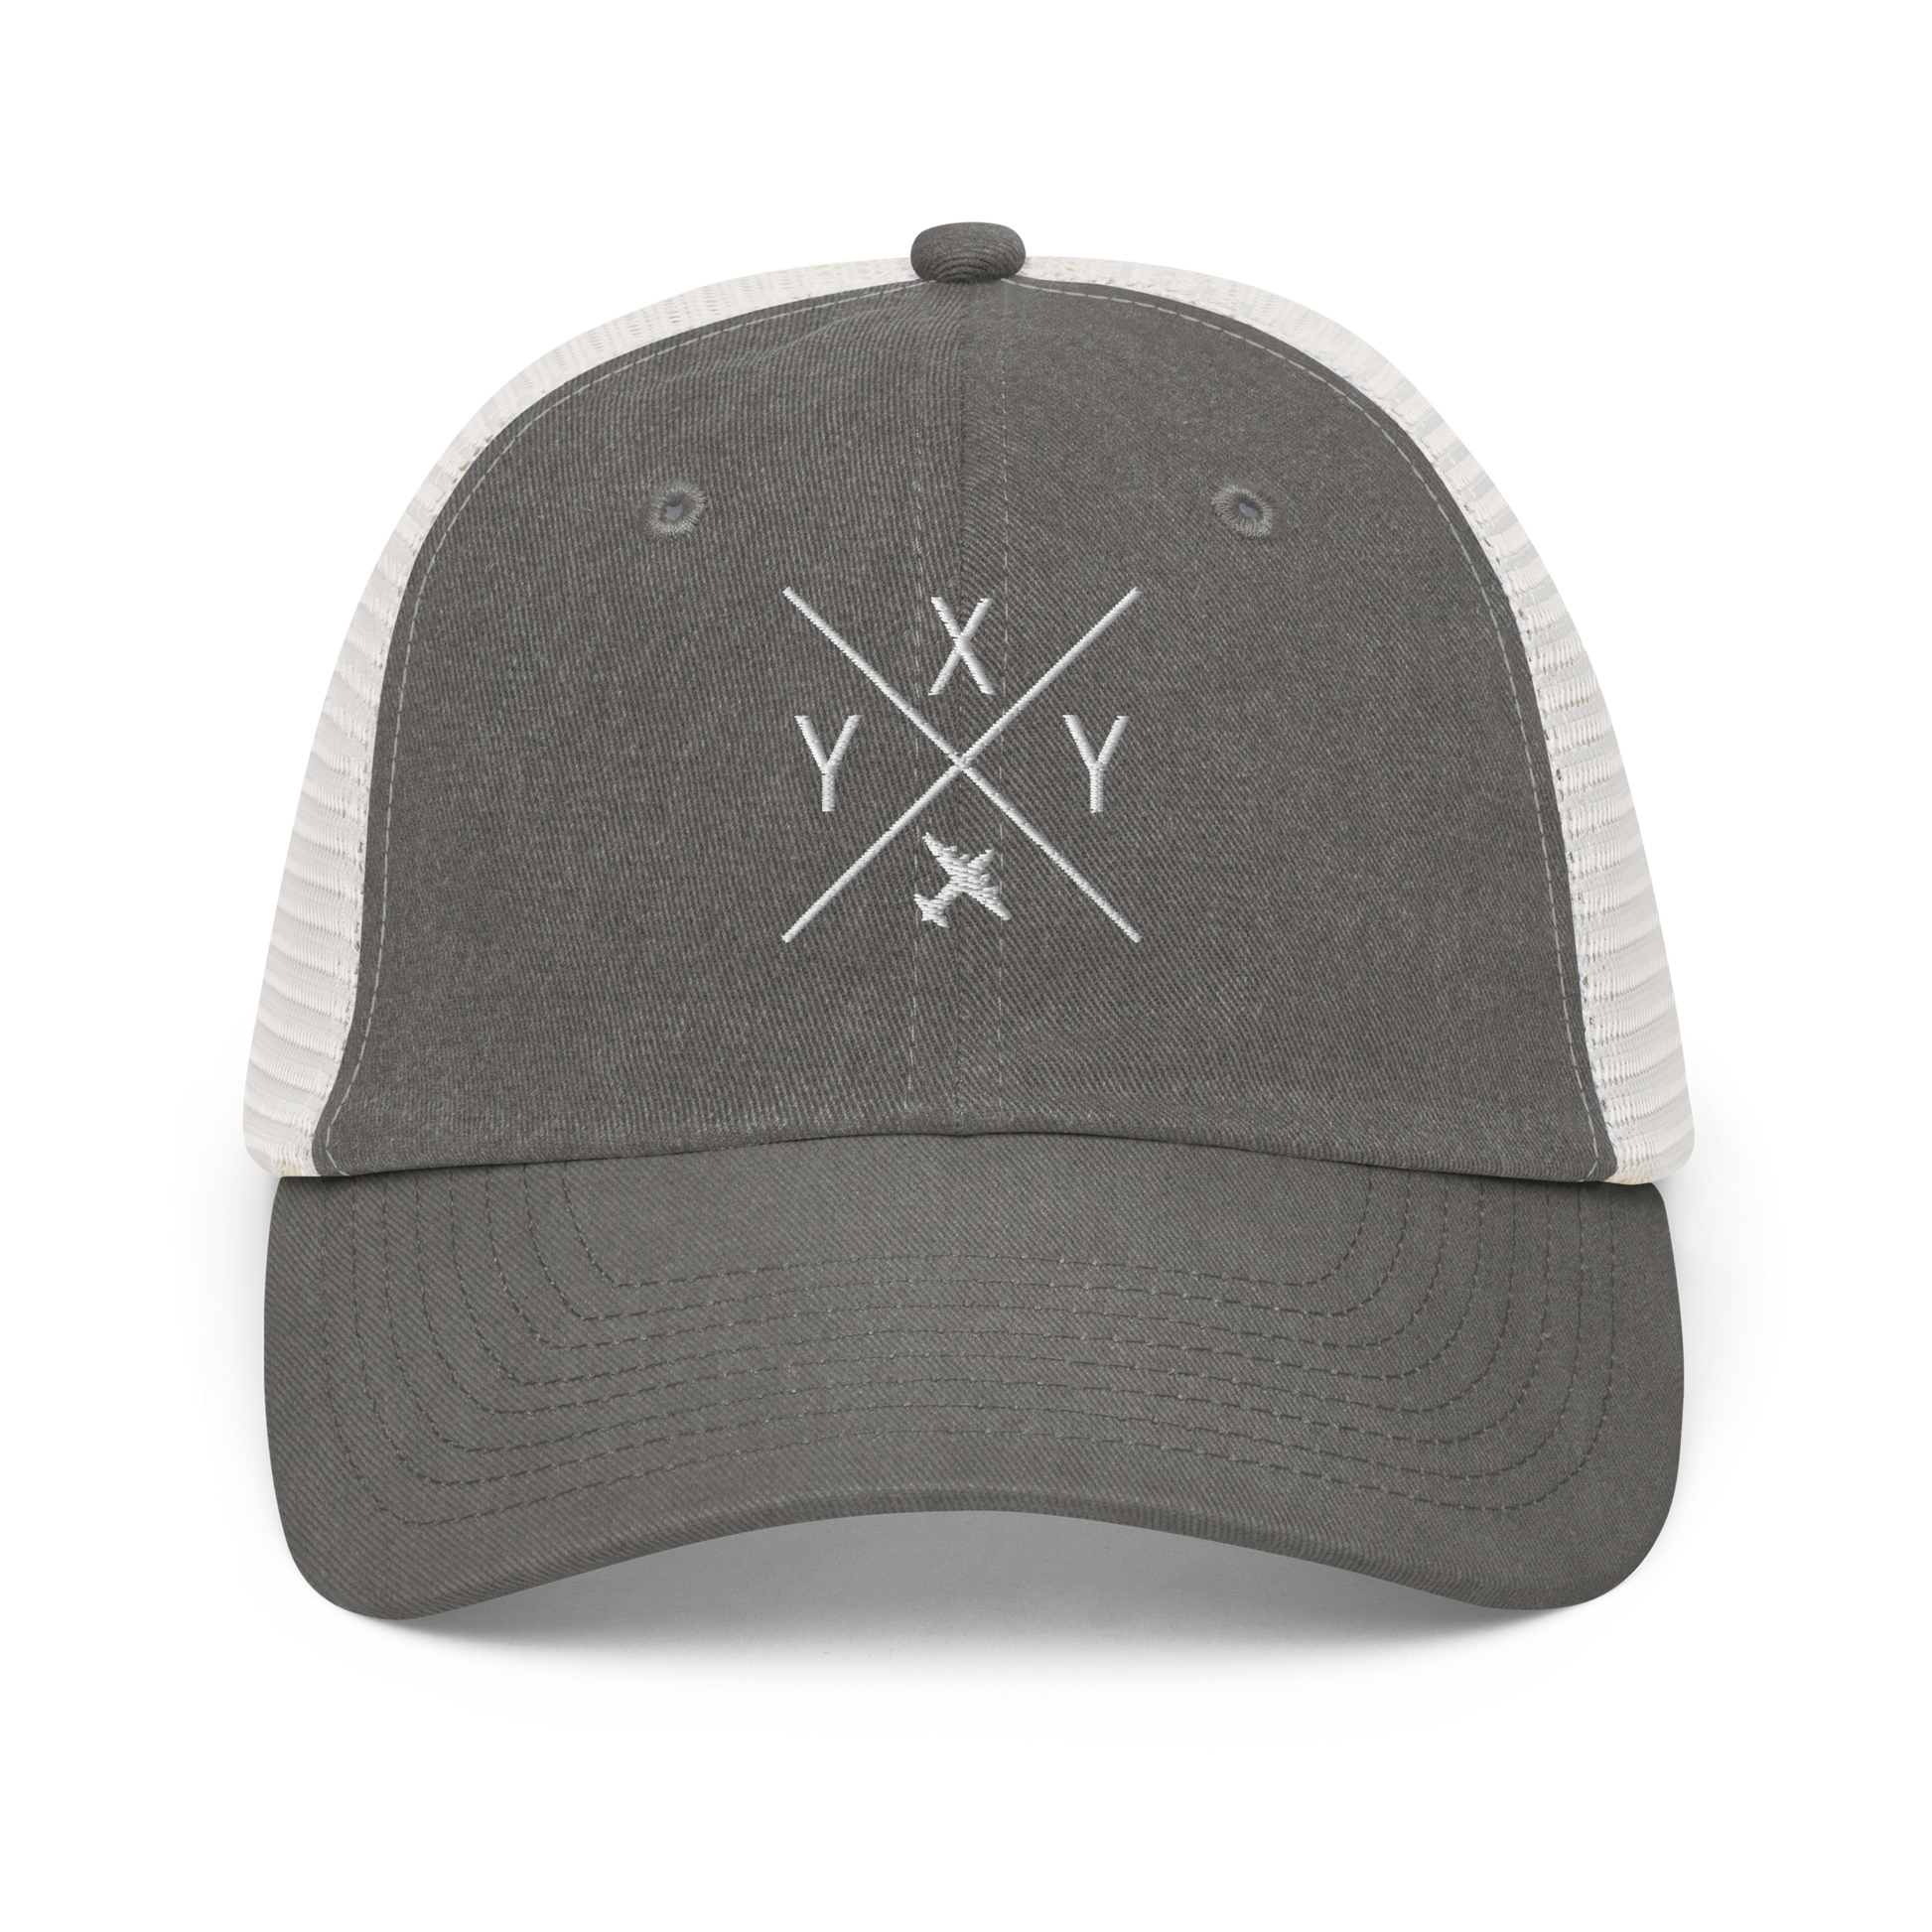 Crossed-X Pigment-Dyed Trucker Cap • YXY Whitehorse • YHM Designs - Image 09